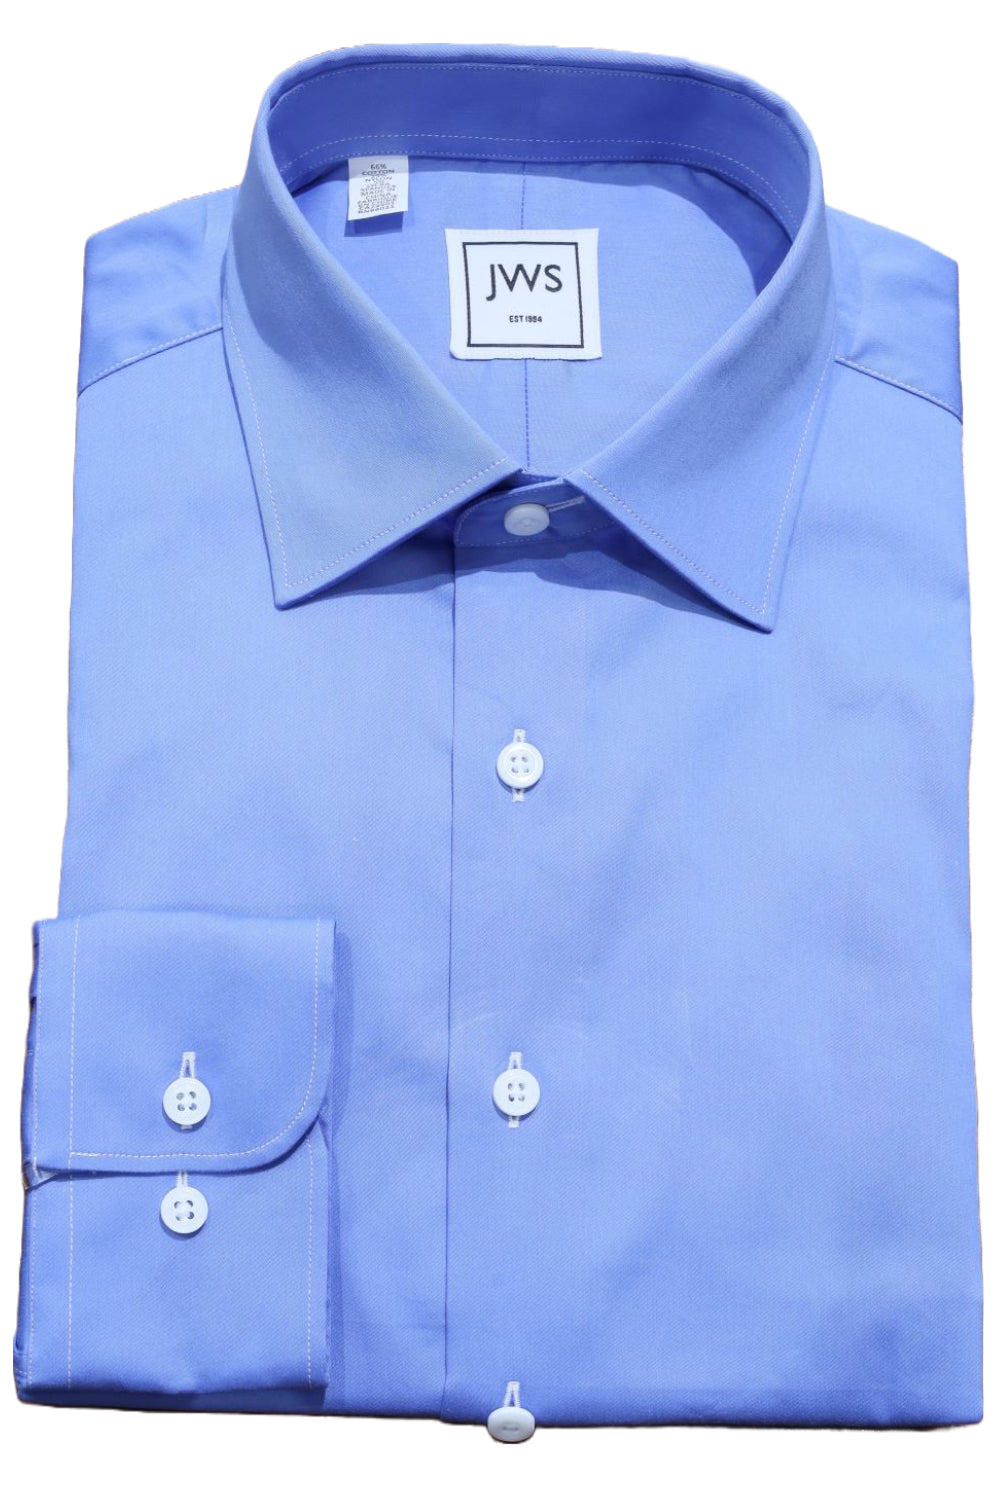 Solid French Blue color Cotton Lycra stretch shirt